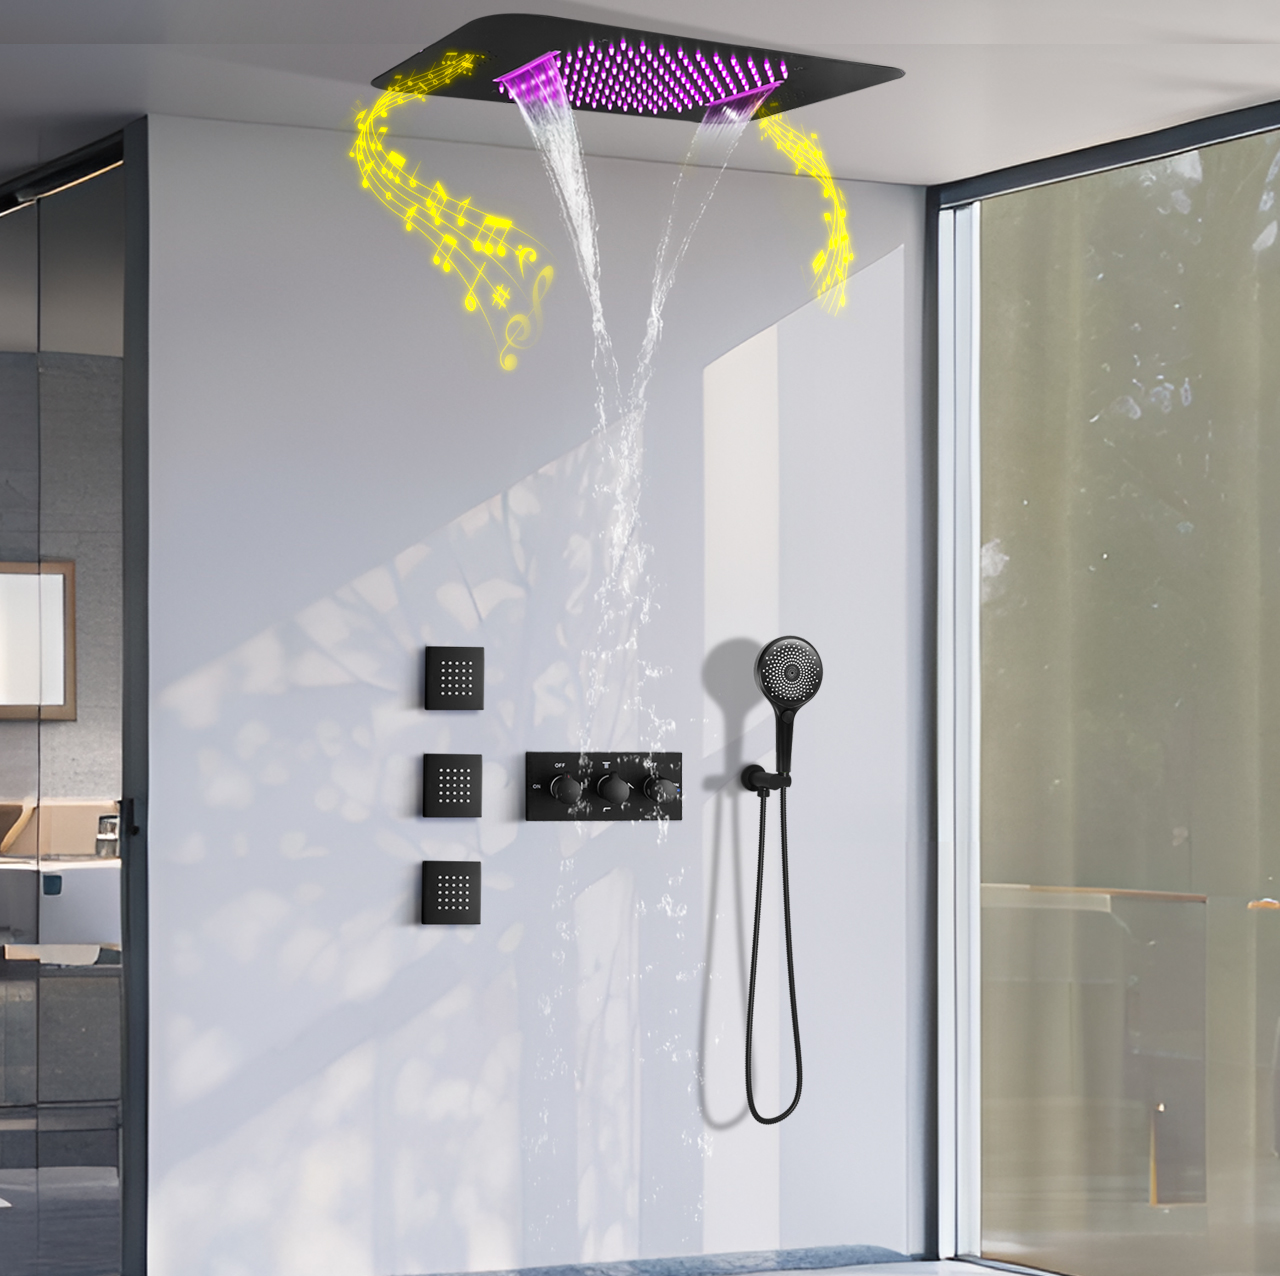 Ducky Black Dark Bathroom LED Music Rain Water Waterfall System Constant Temperature Mixed Shower Water Faucet System Jet Kit